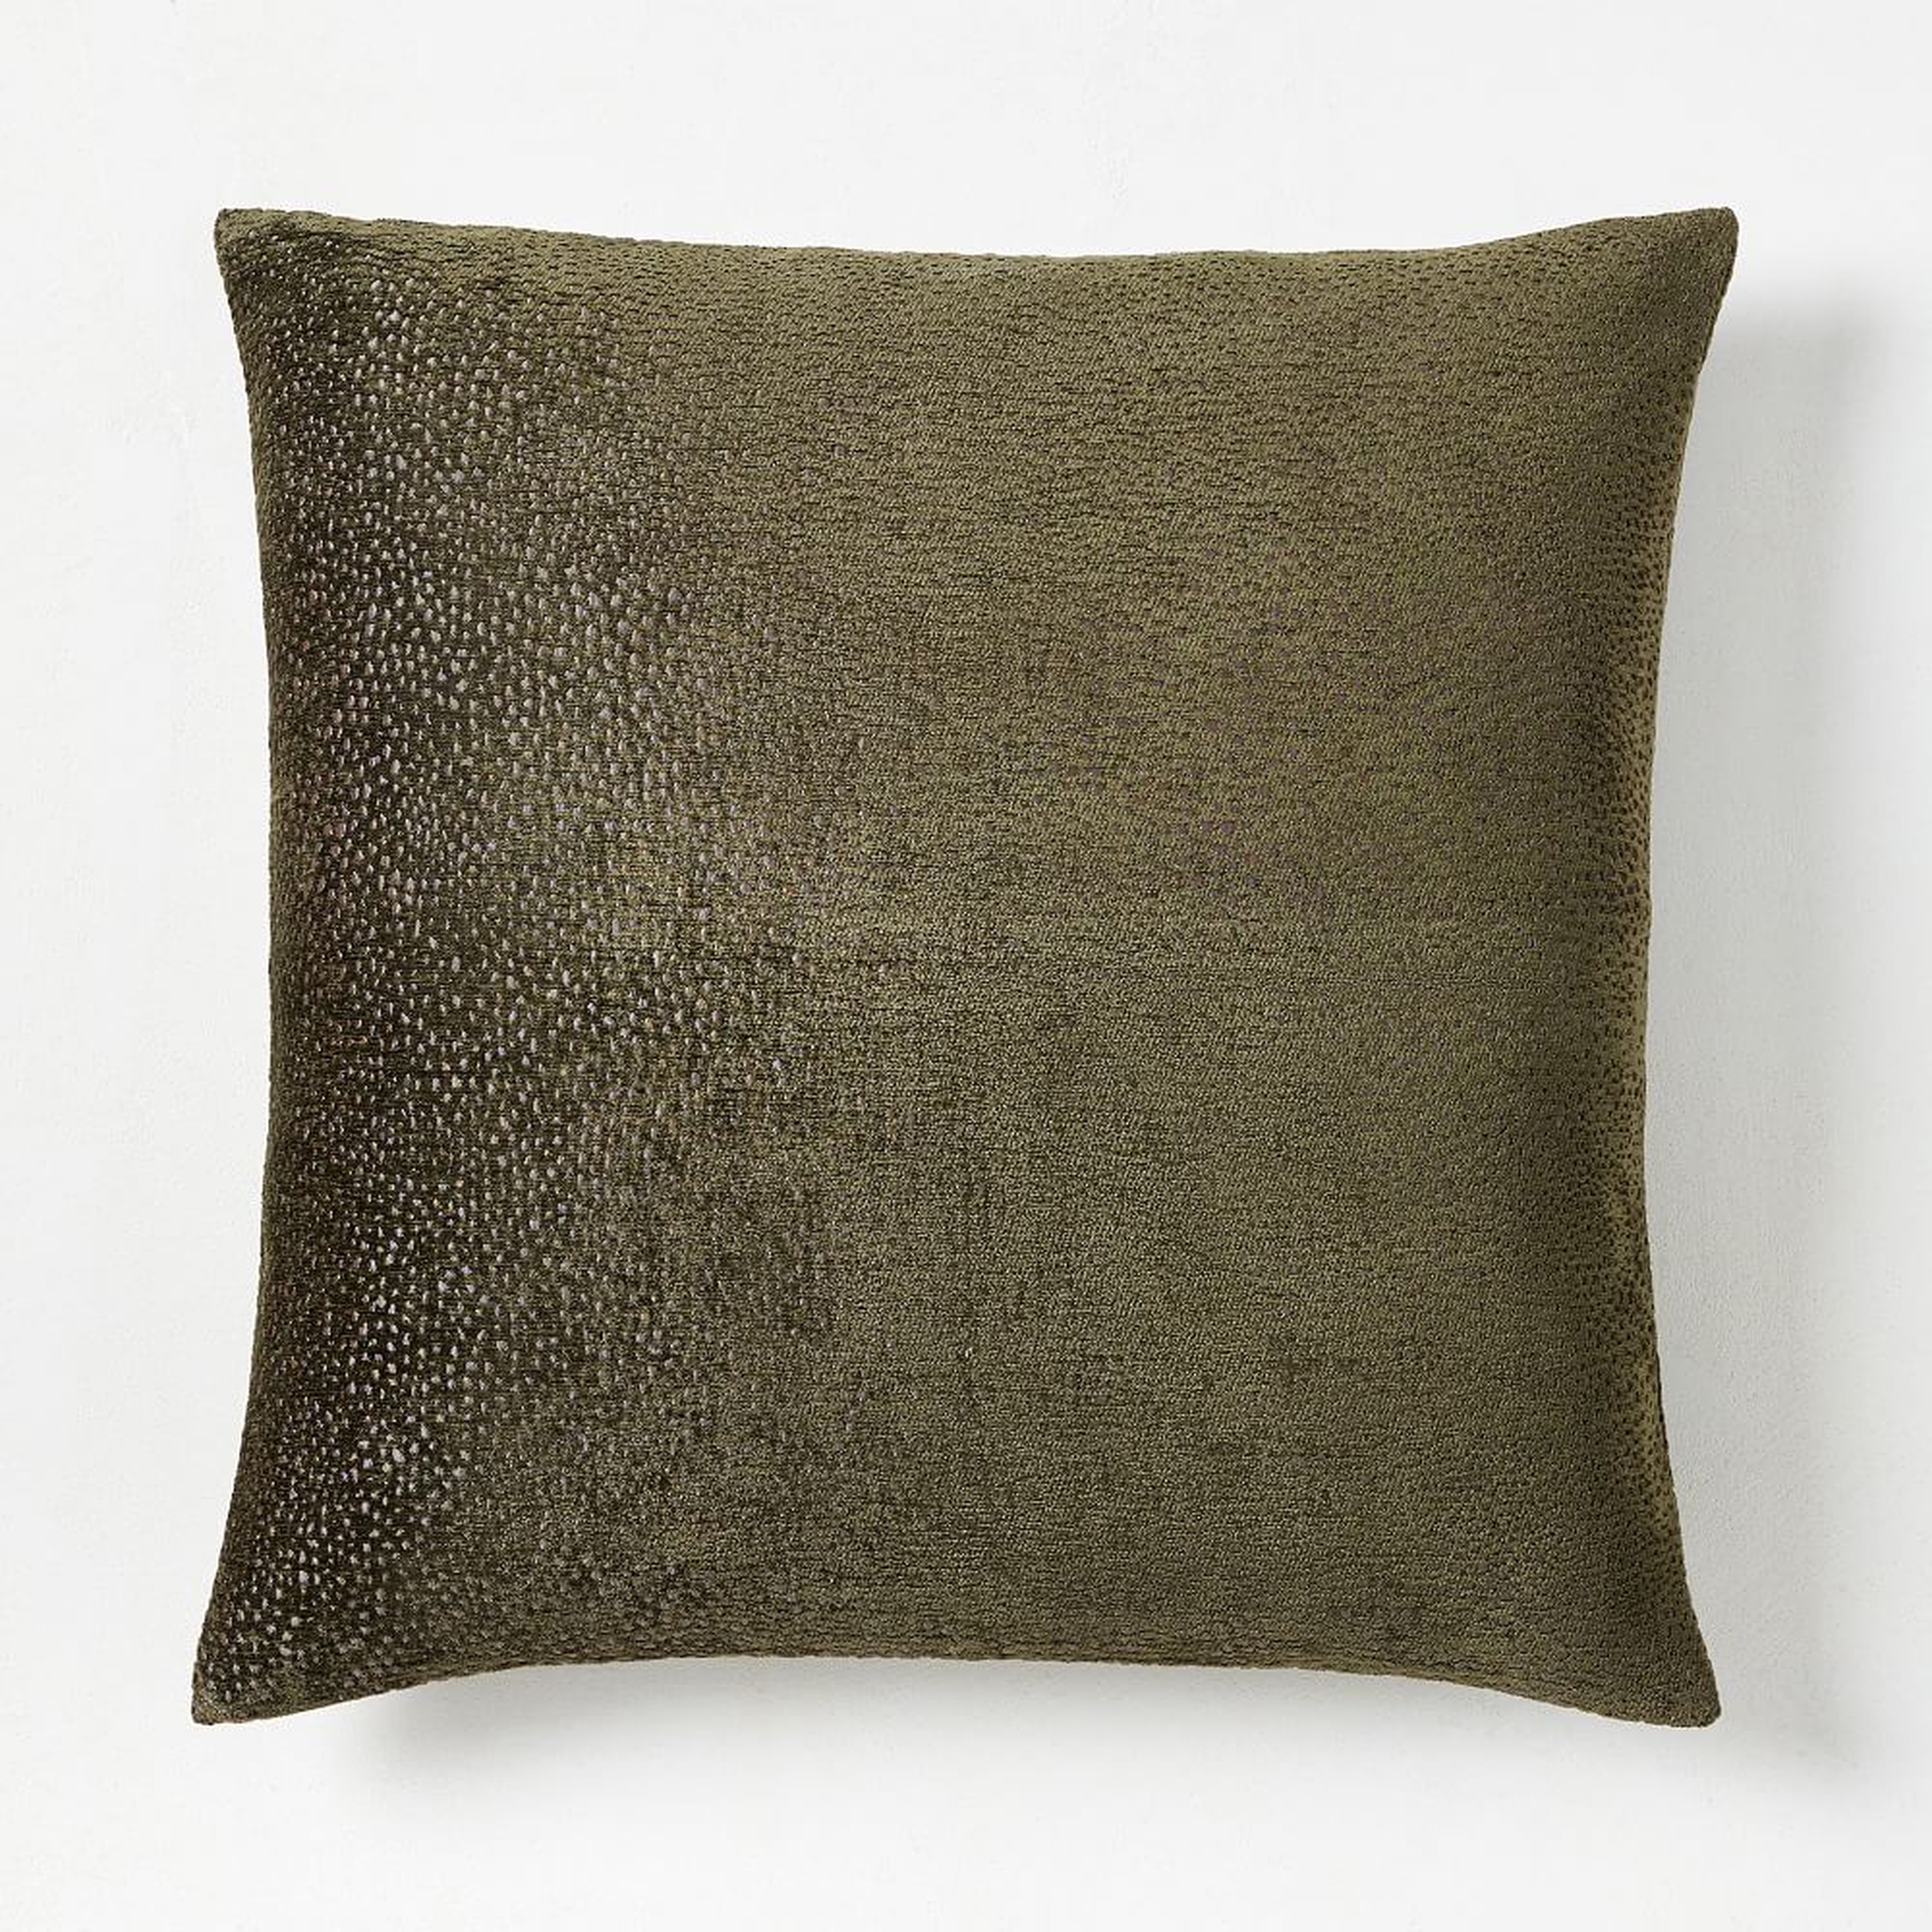 Dotted Chenille Jacquard Pillow Cover, Dark Olive, 20"x20", Set of 2 - West Elm